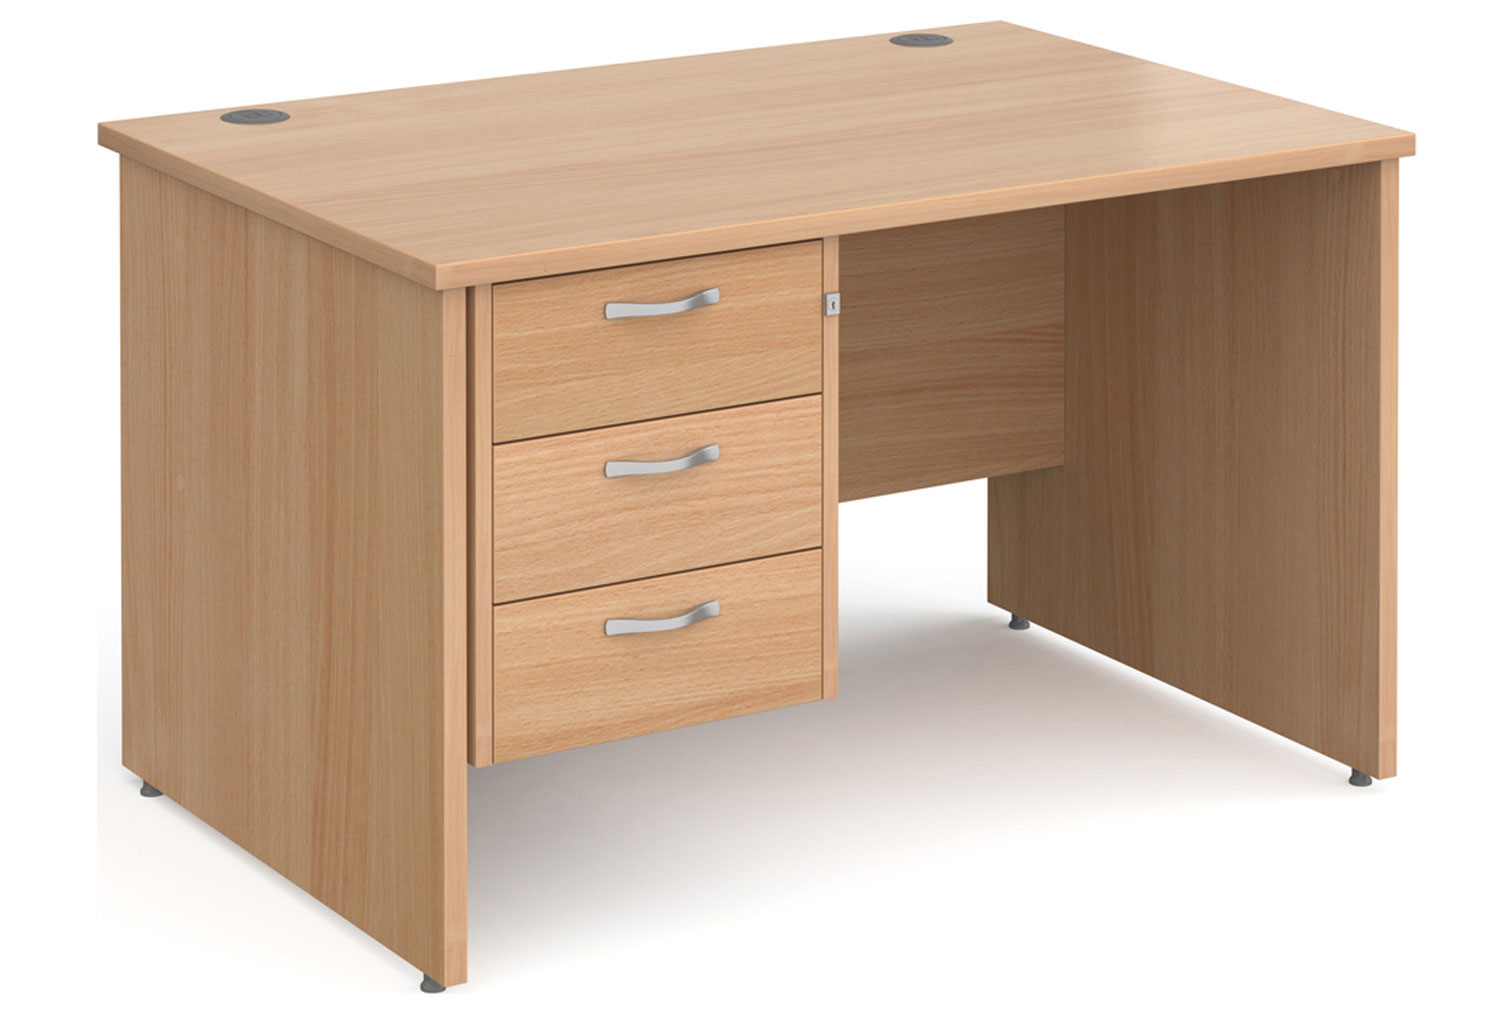 Tully Panel End Rectangular Office Desk 3 Drawers, 120wx80dx73h (cm), Beech, Express Delivery